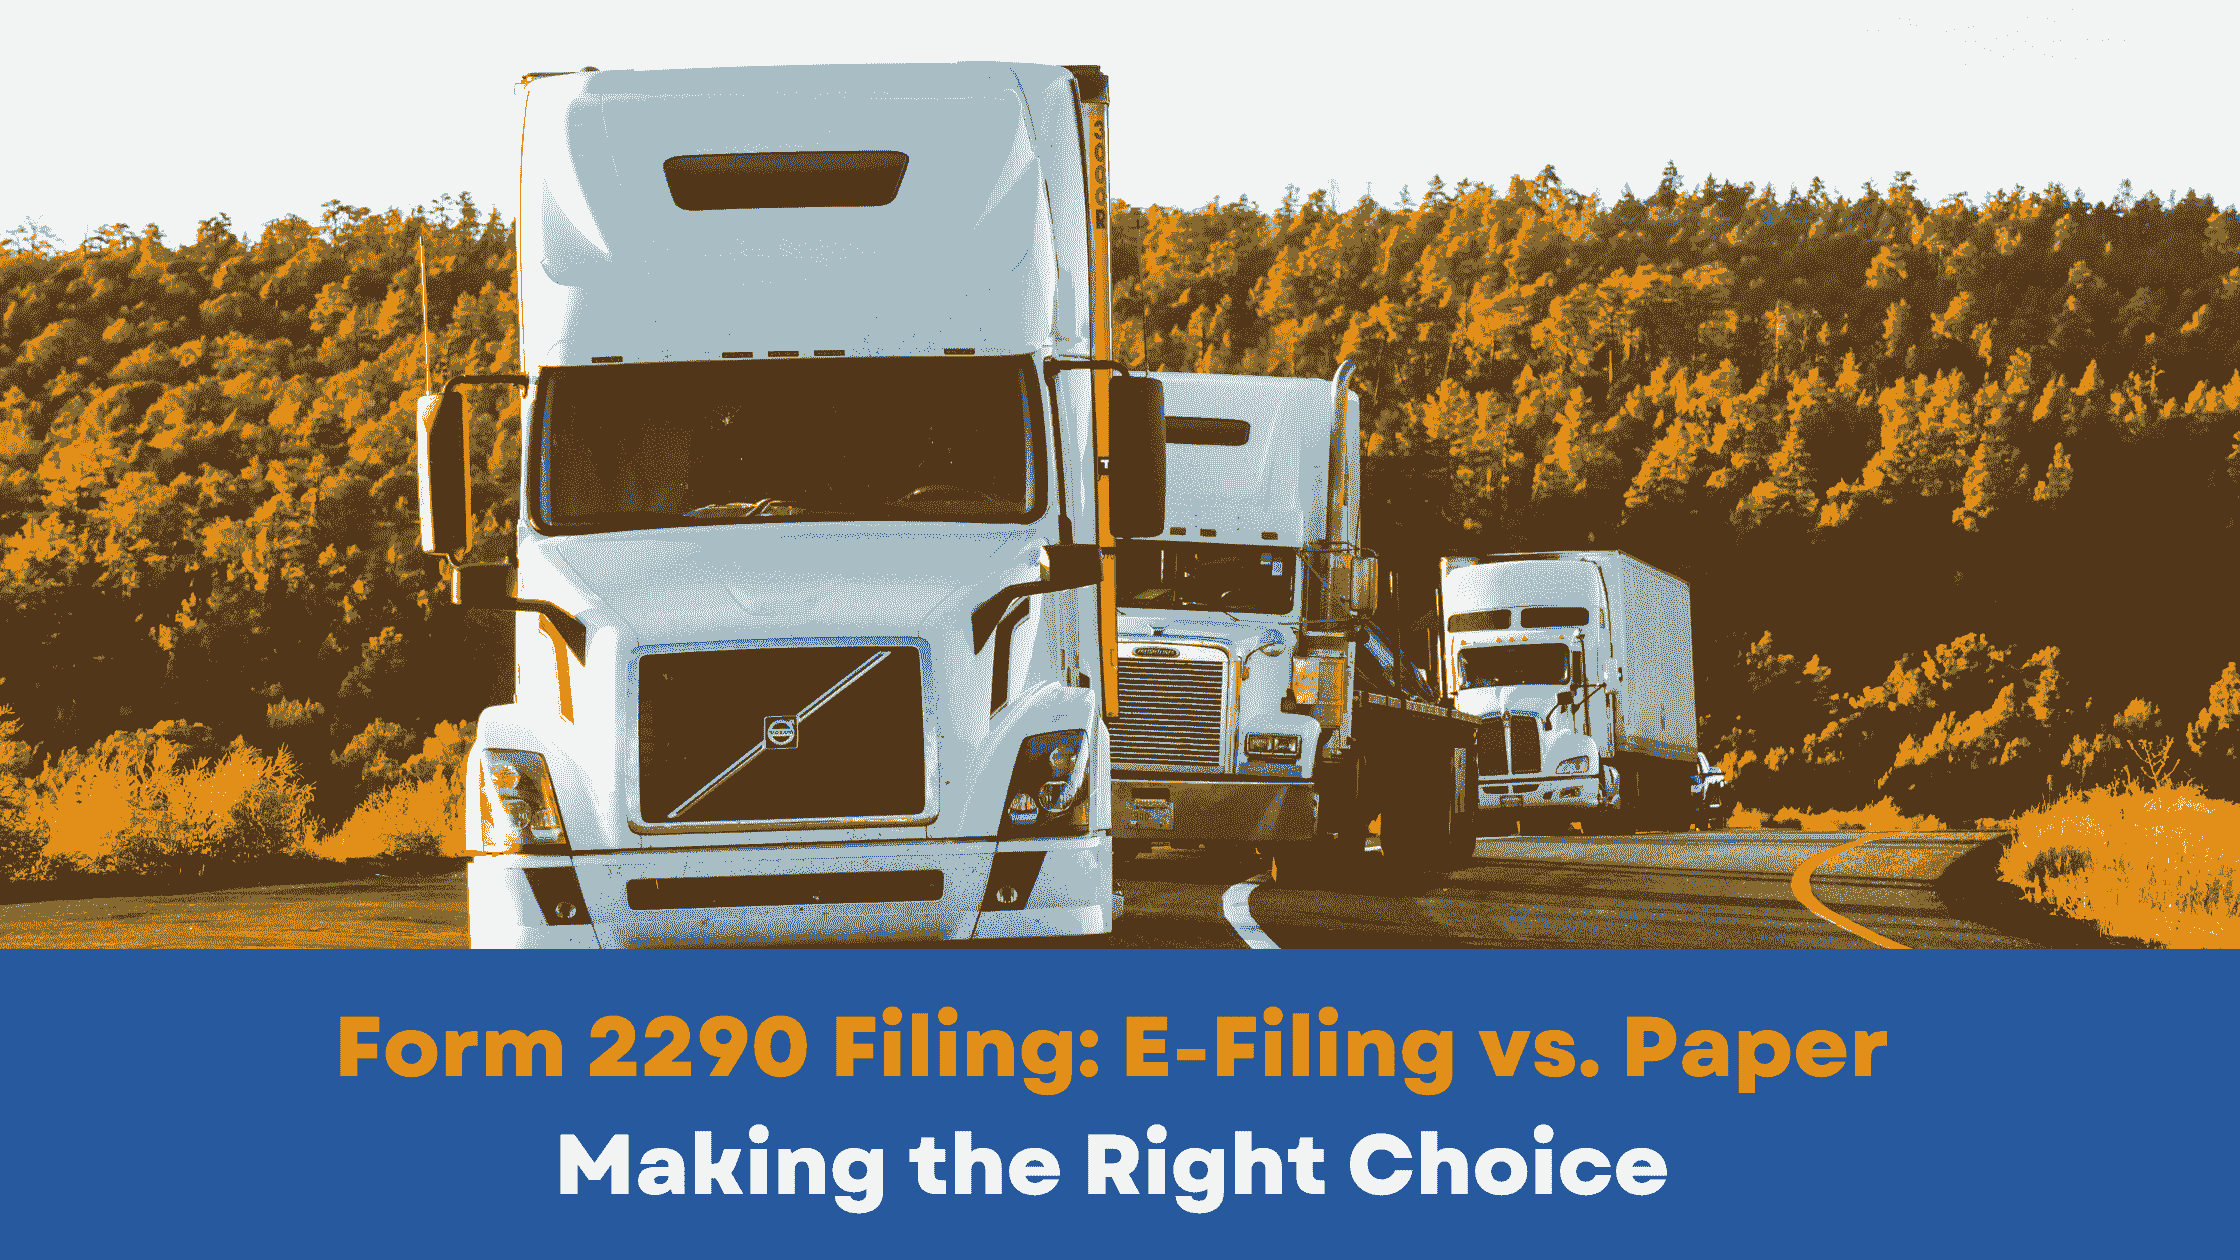 Form 2290 Filing: Online vs. Paper- Making the Right Choice